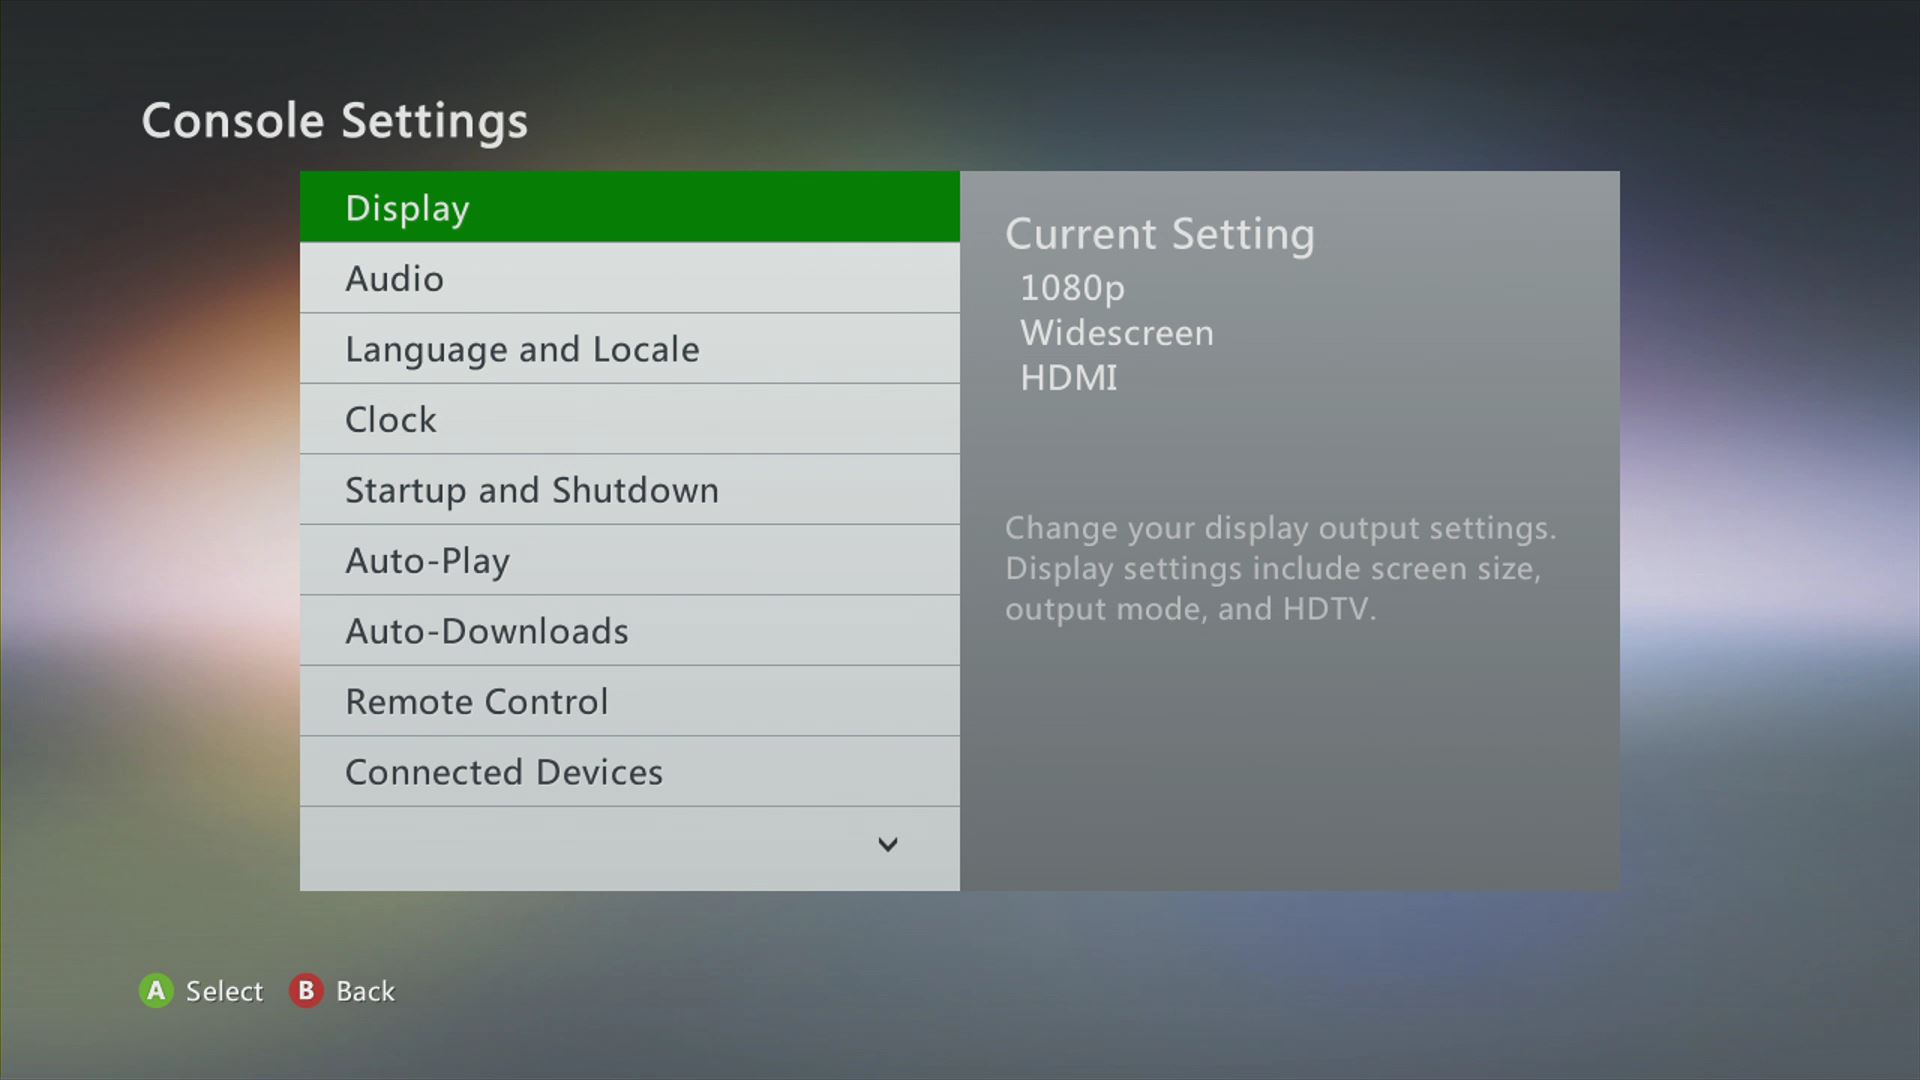 Console Settings, Display